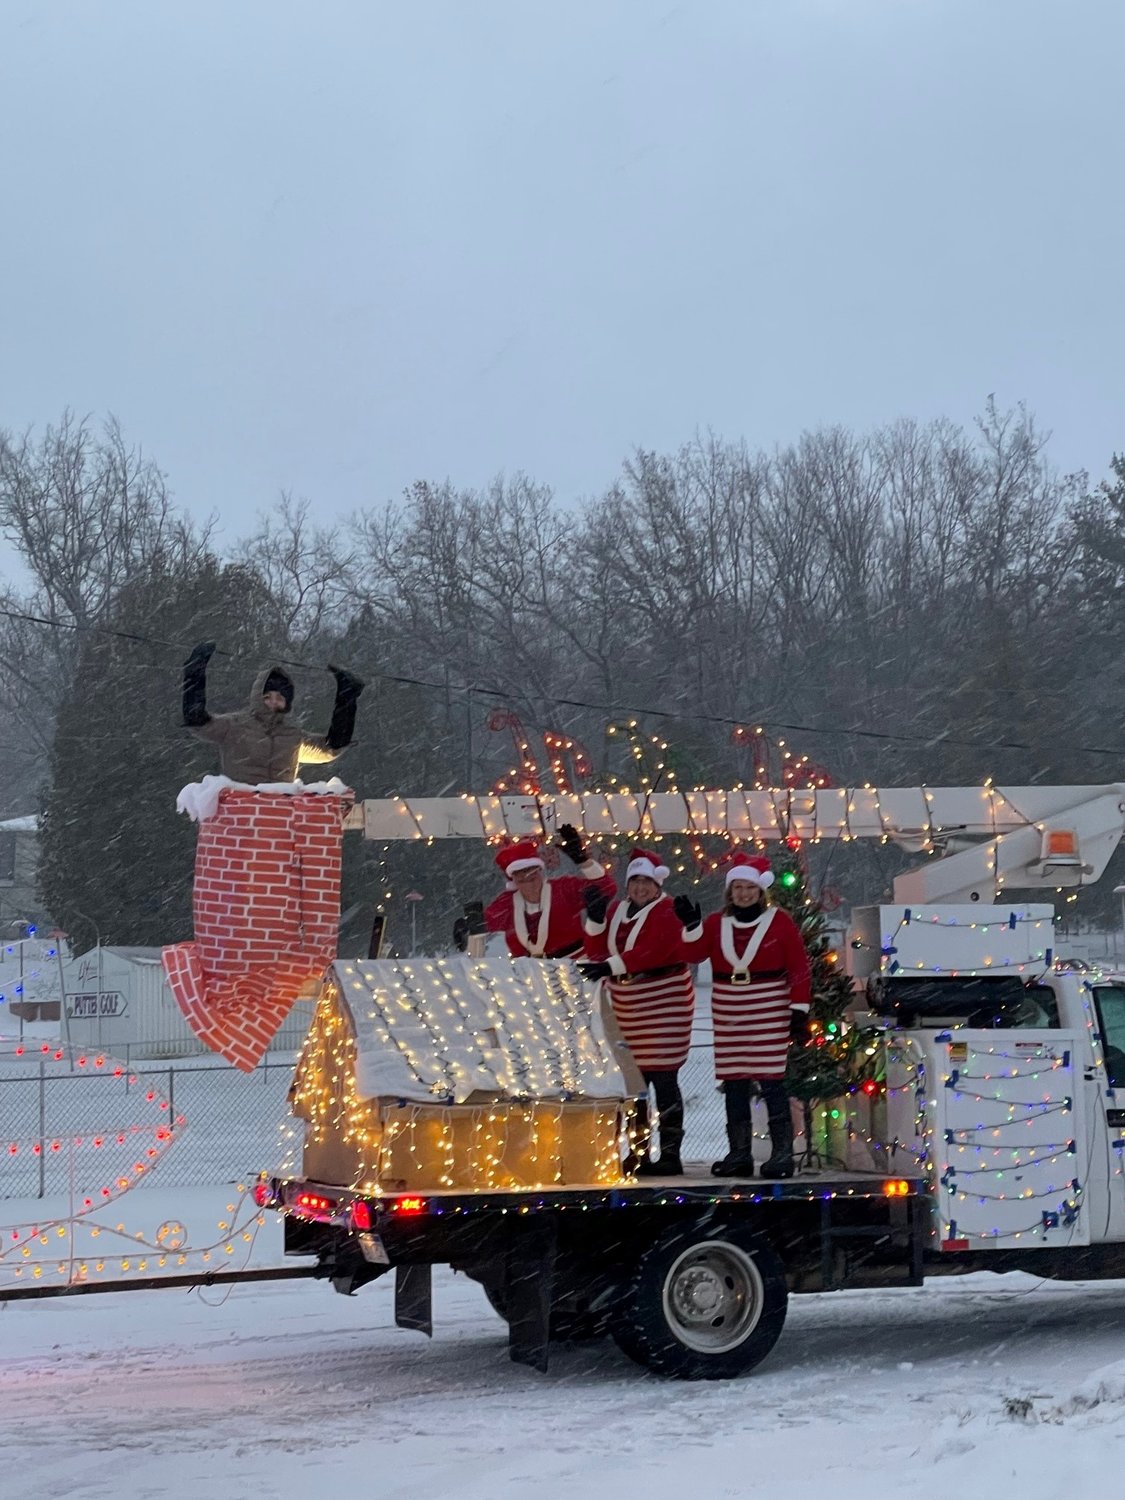 Santa’s boots, Maggie Jo Ware in the chimney, is
joined by Santa’s elves, Tracey Wheeler-Clay, Kathy
Maharas, and Tracey Connelly on one of the several
City of Harrison parade vehicles. (